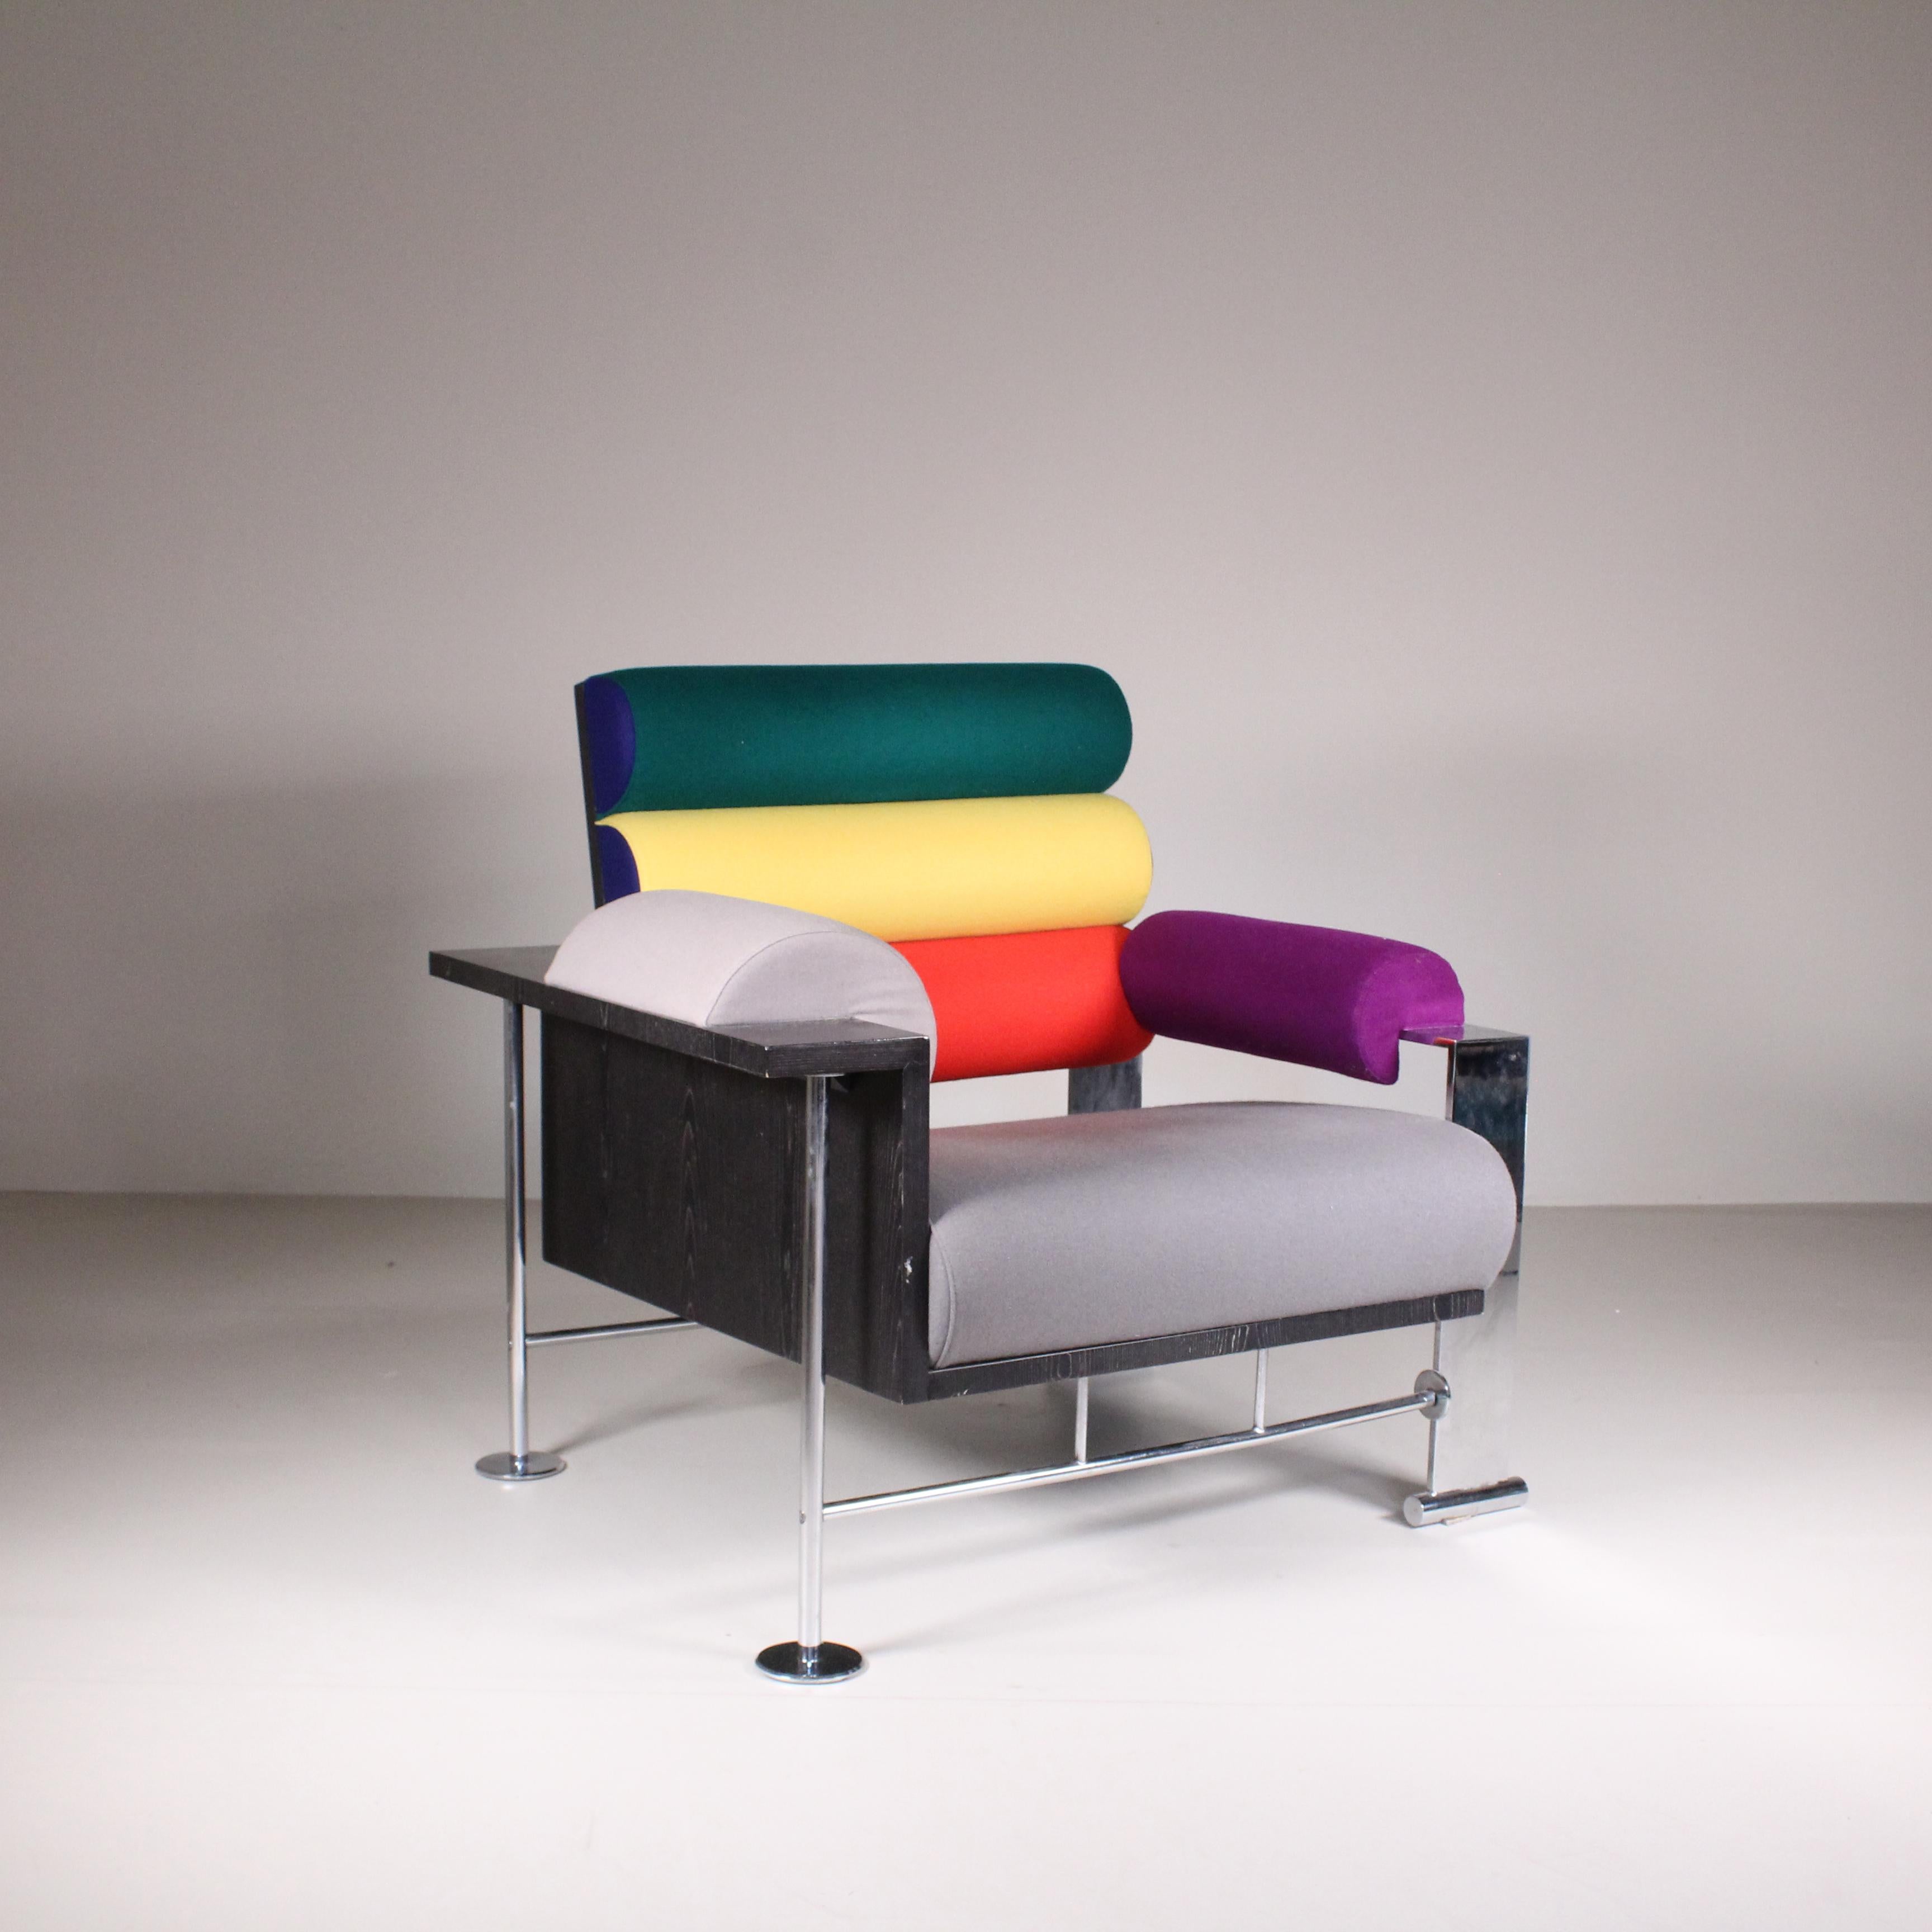 Las Vegas armchair by Peter Shire, 1988 For Sale 4